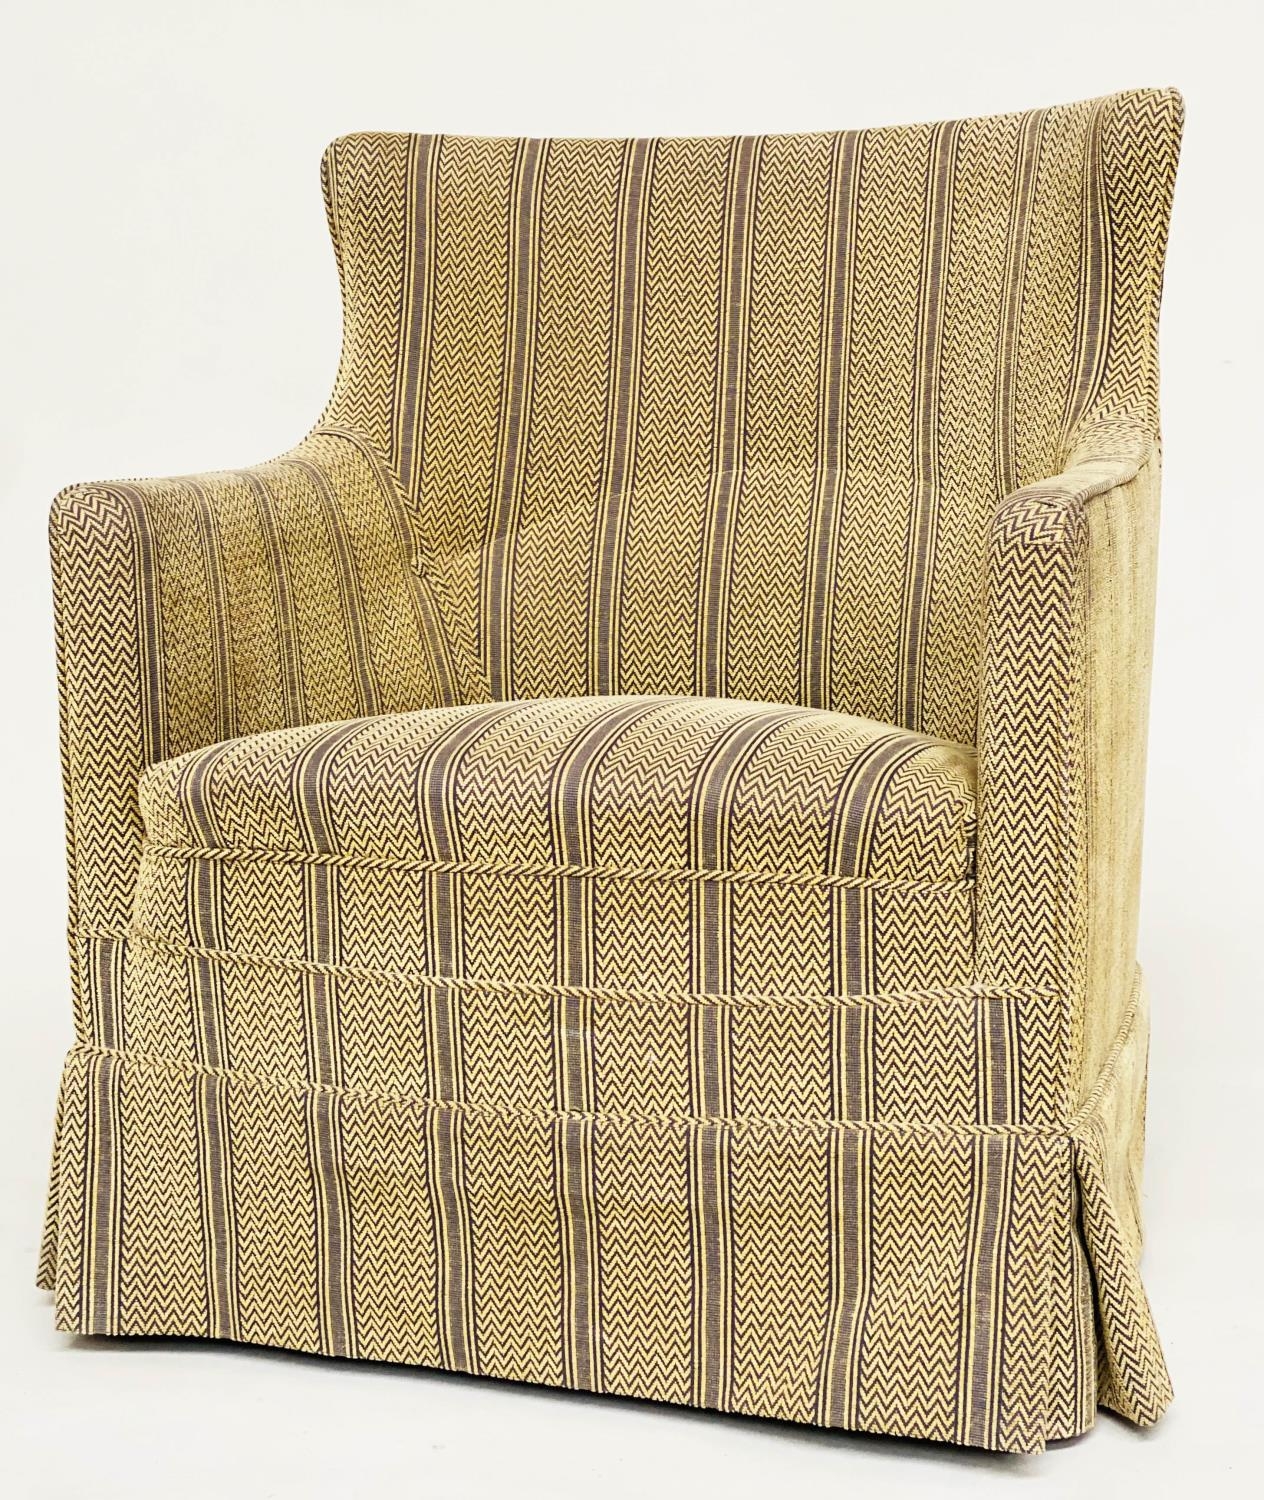 ARMCHAIR, Edwardian style striped herringbone taupe fabric with straight back and skirts, 82cm W.